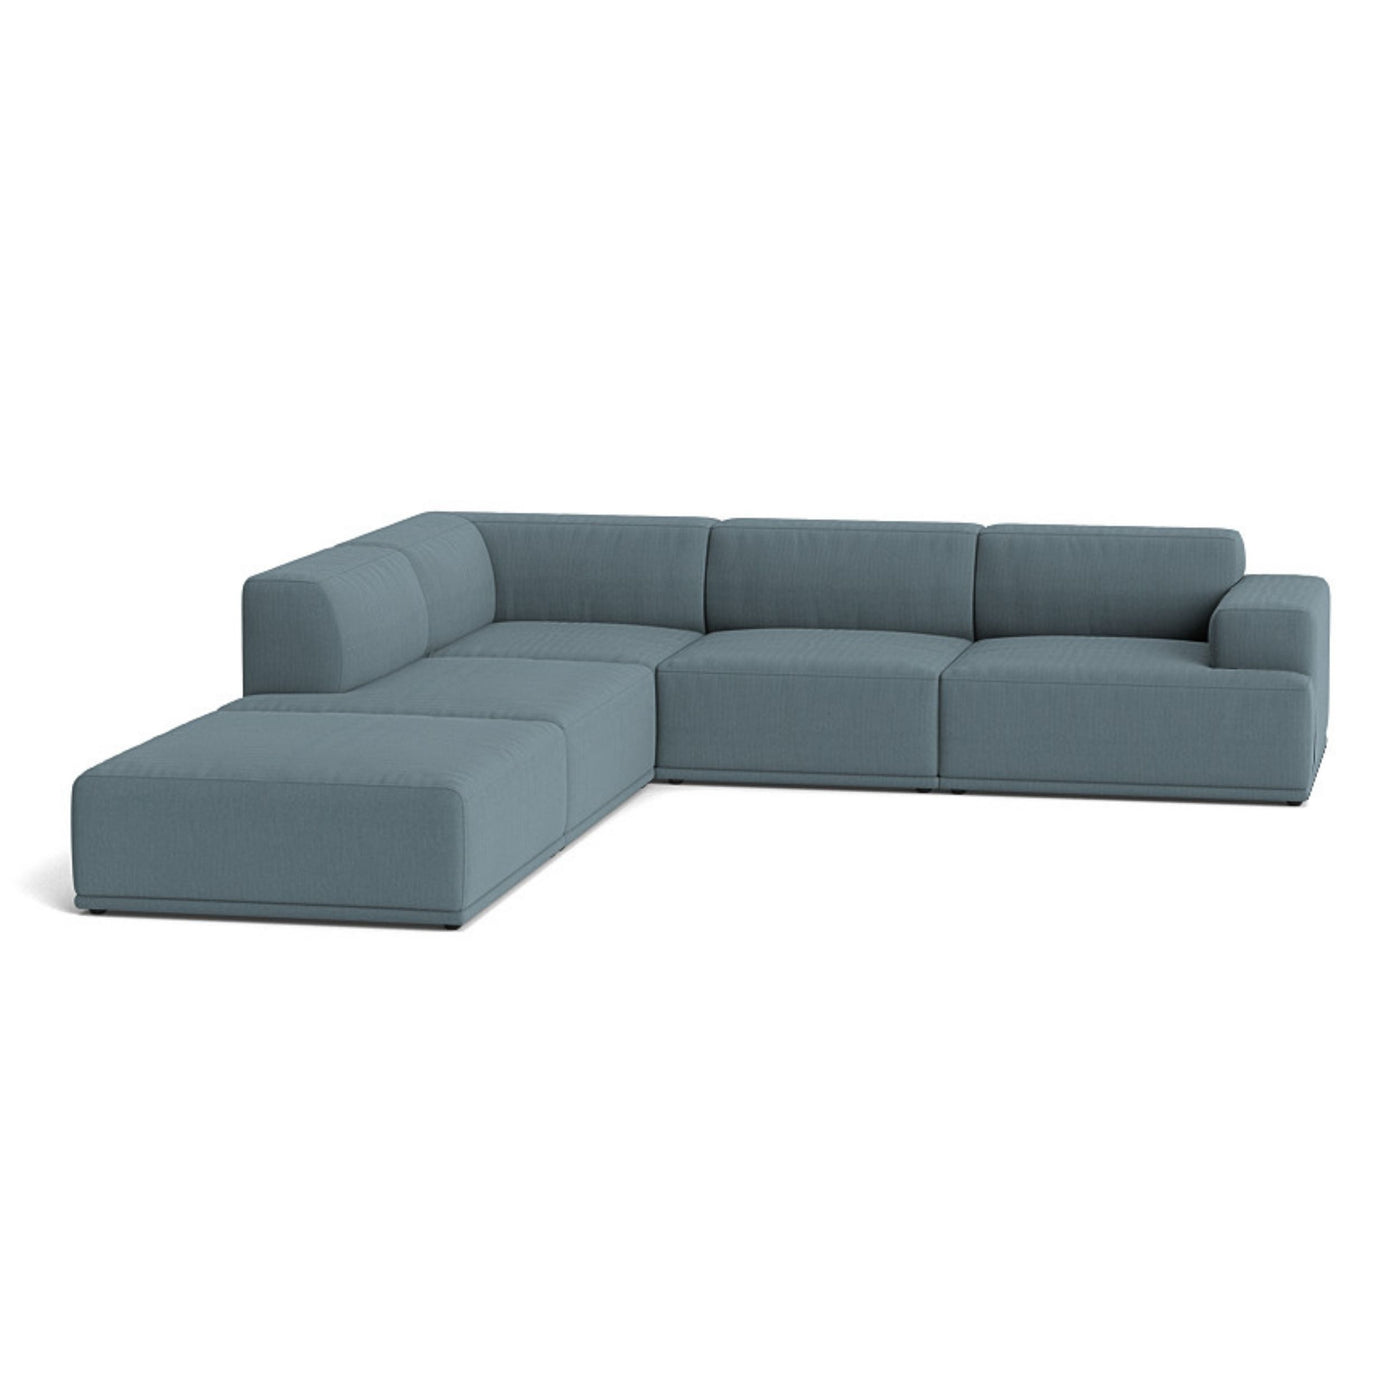 Muuto Connect Soft Modular Corner Sofa, configuration 1. Made-to-order from someday designs. #colour_re-wool-768